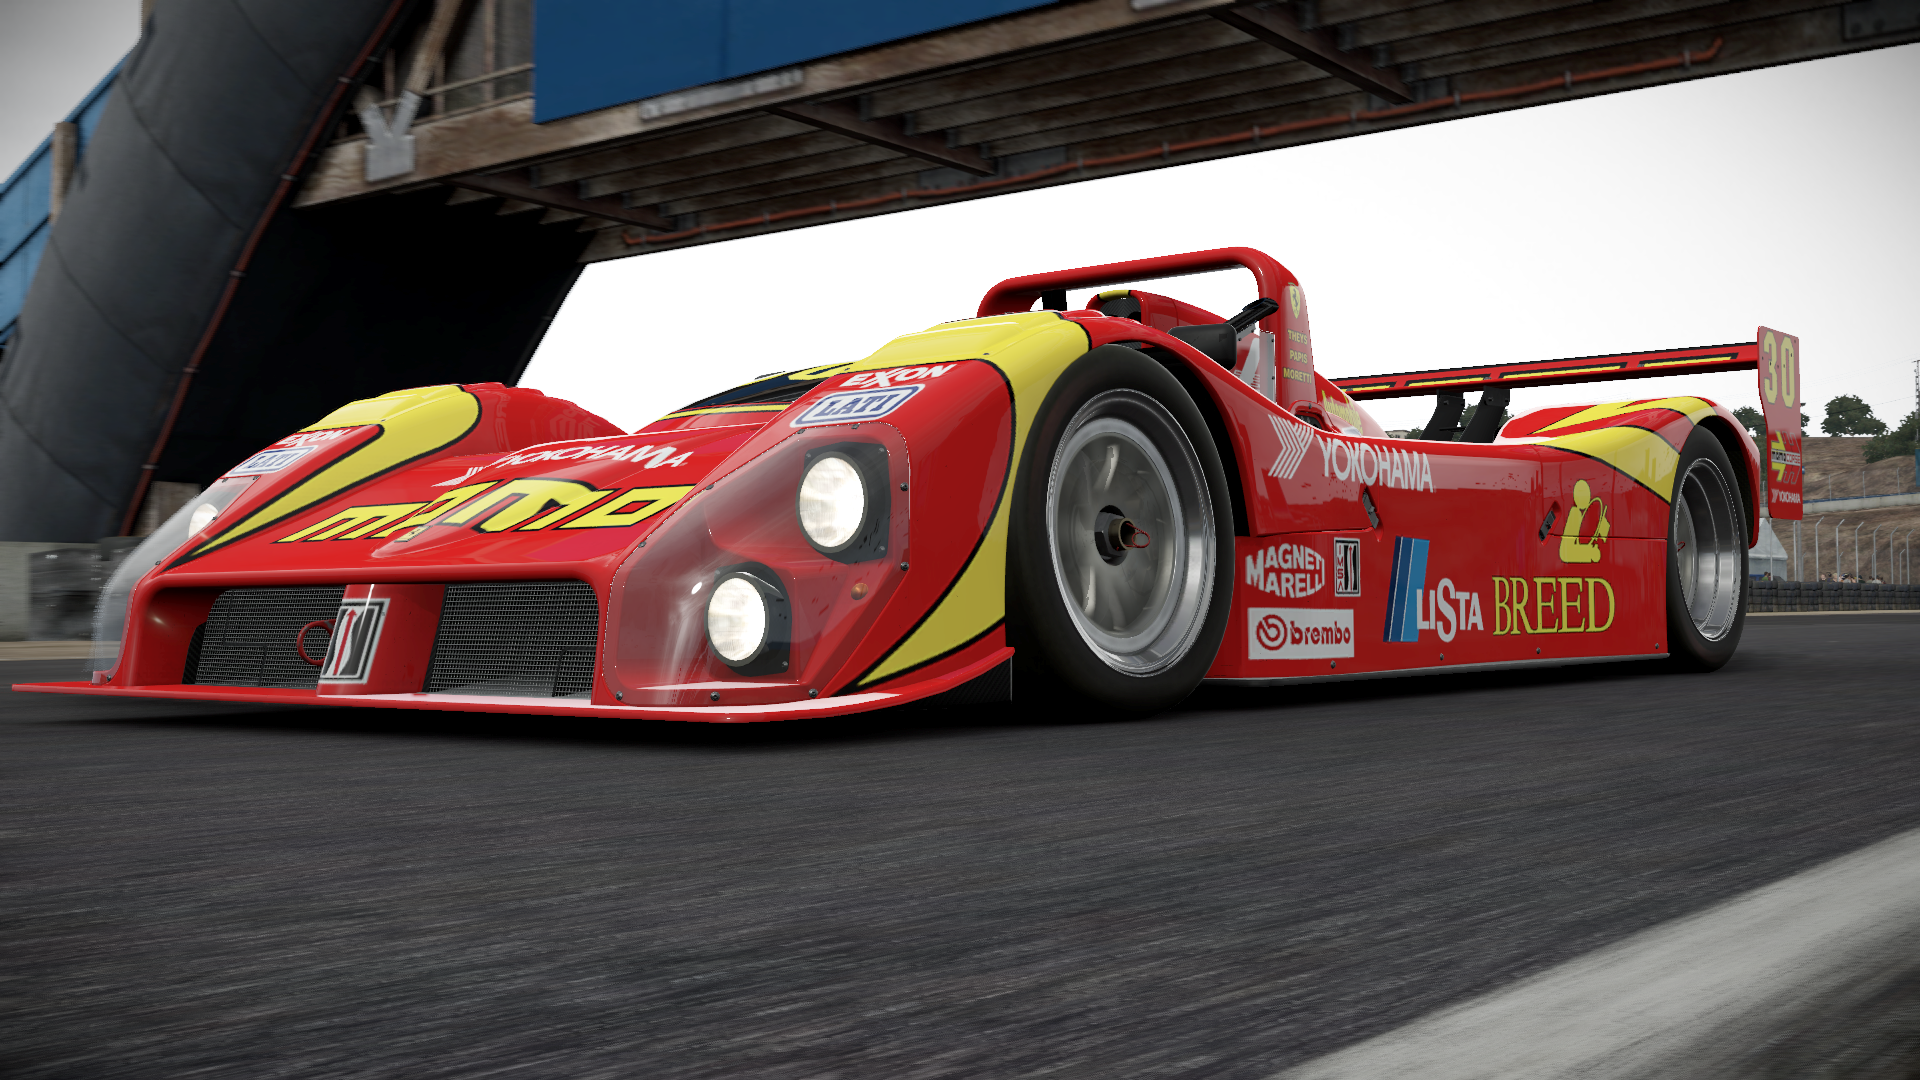 The Always Up-To-Date Project CARS 2 Car List – GTPlanet